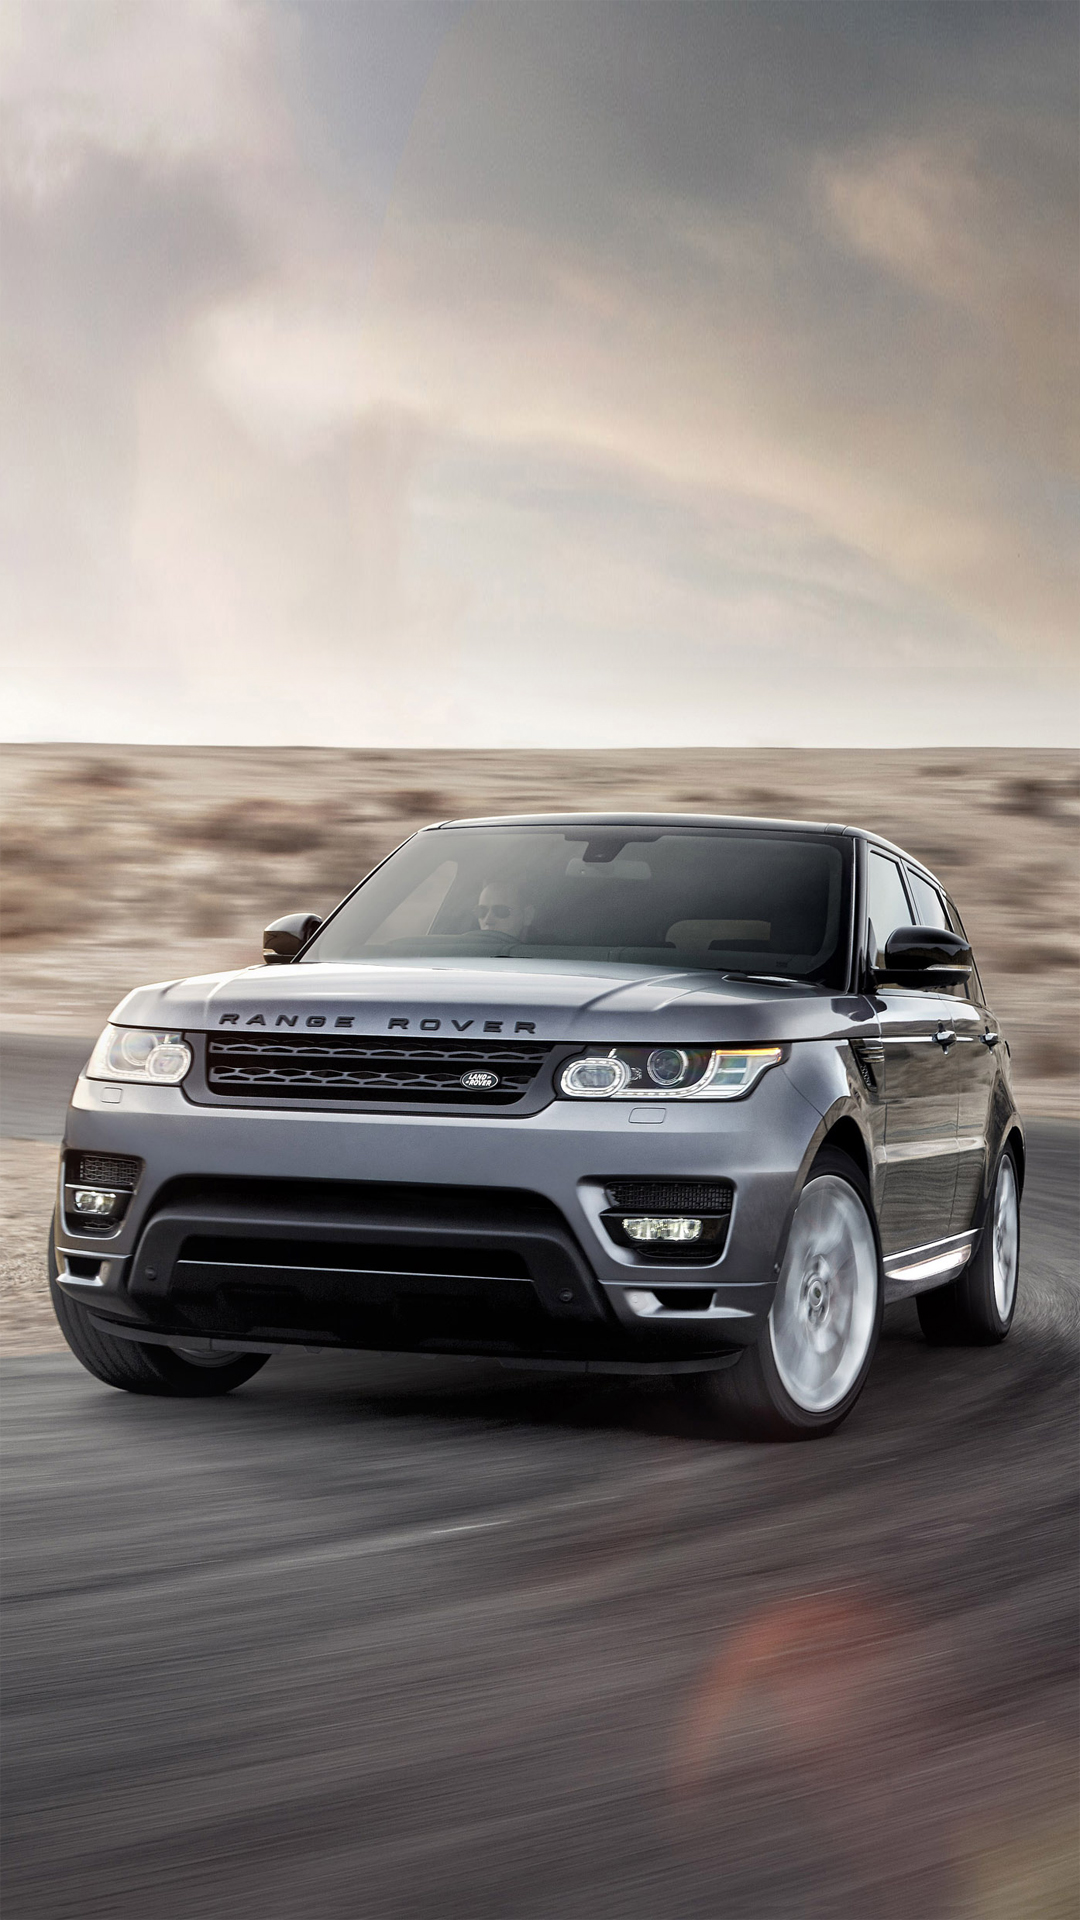 Range Rover Sport Best Htc One Wallpaper And Easy To